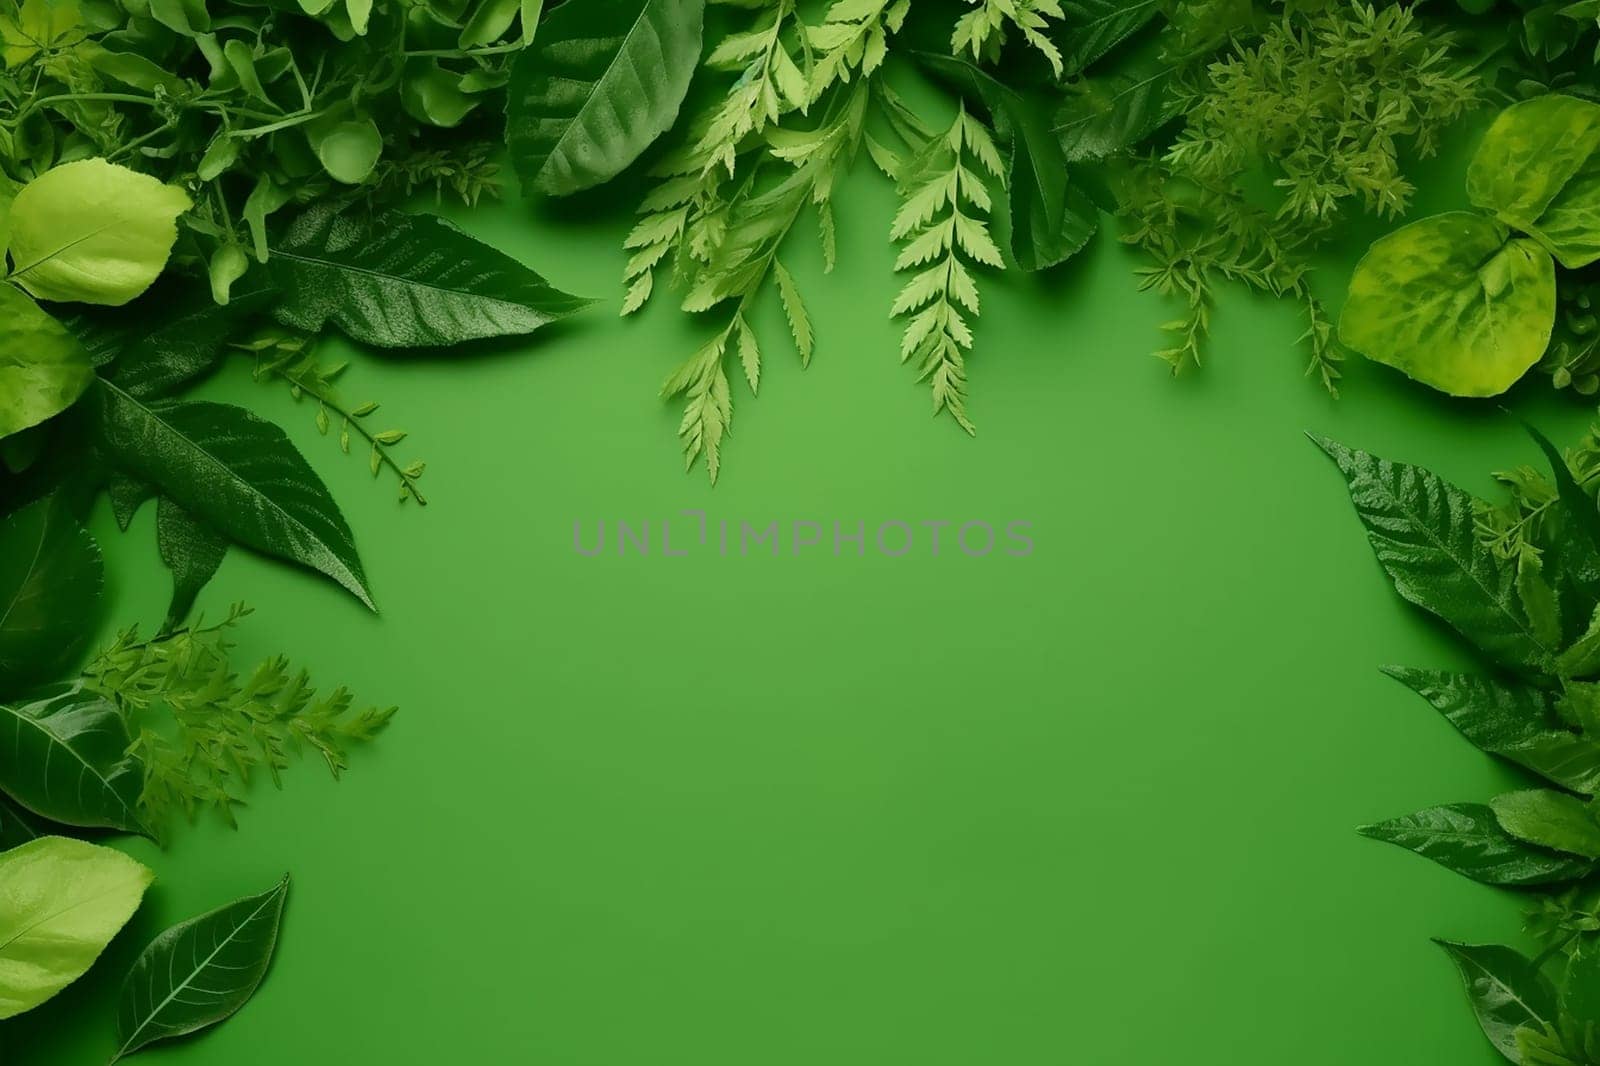 Lush green leaves set against a vibrant green background.